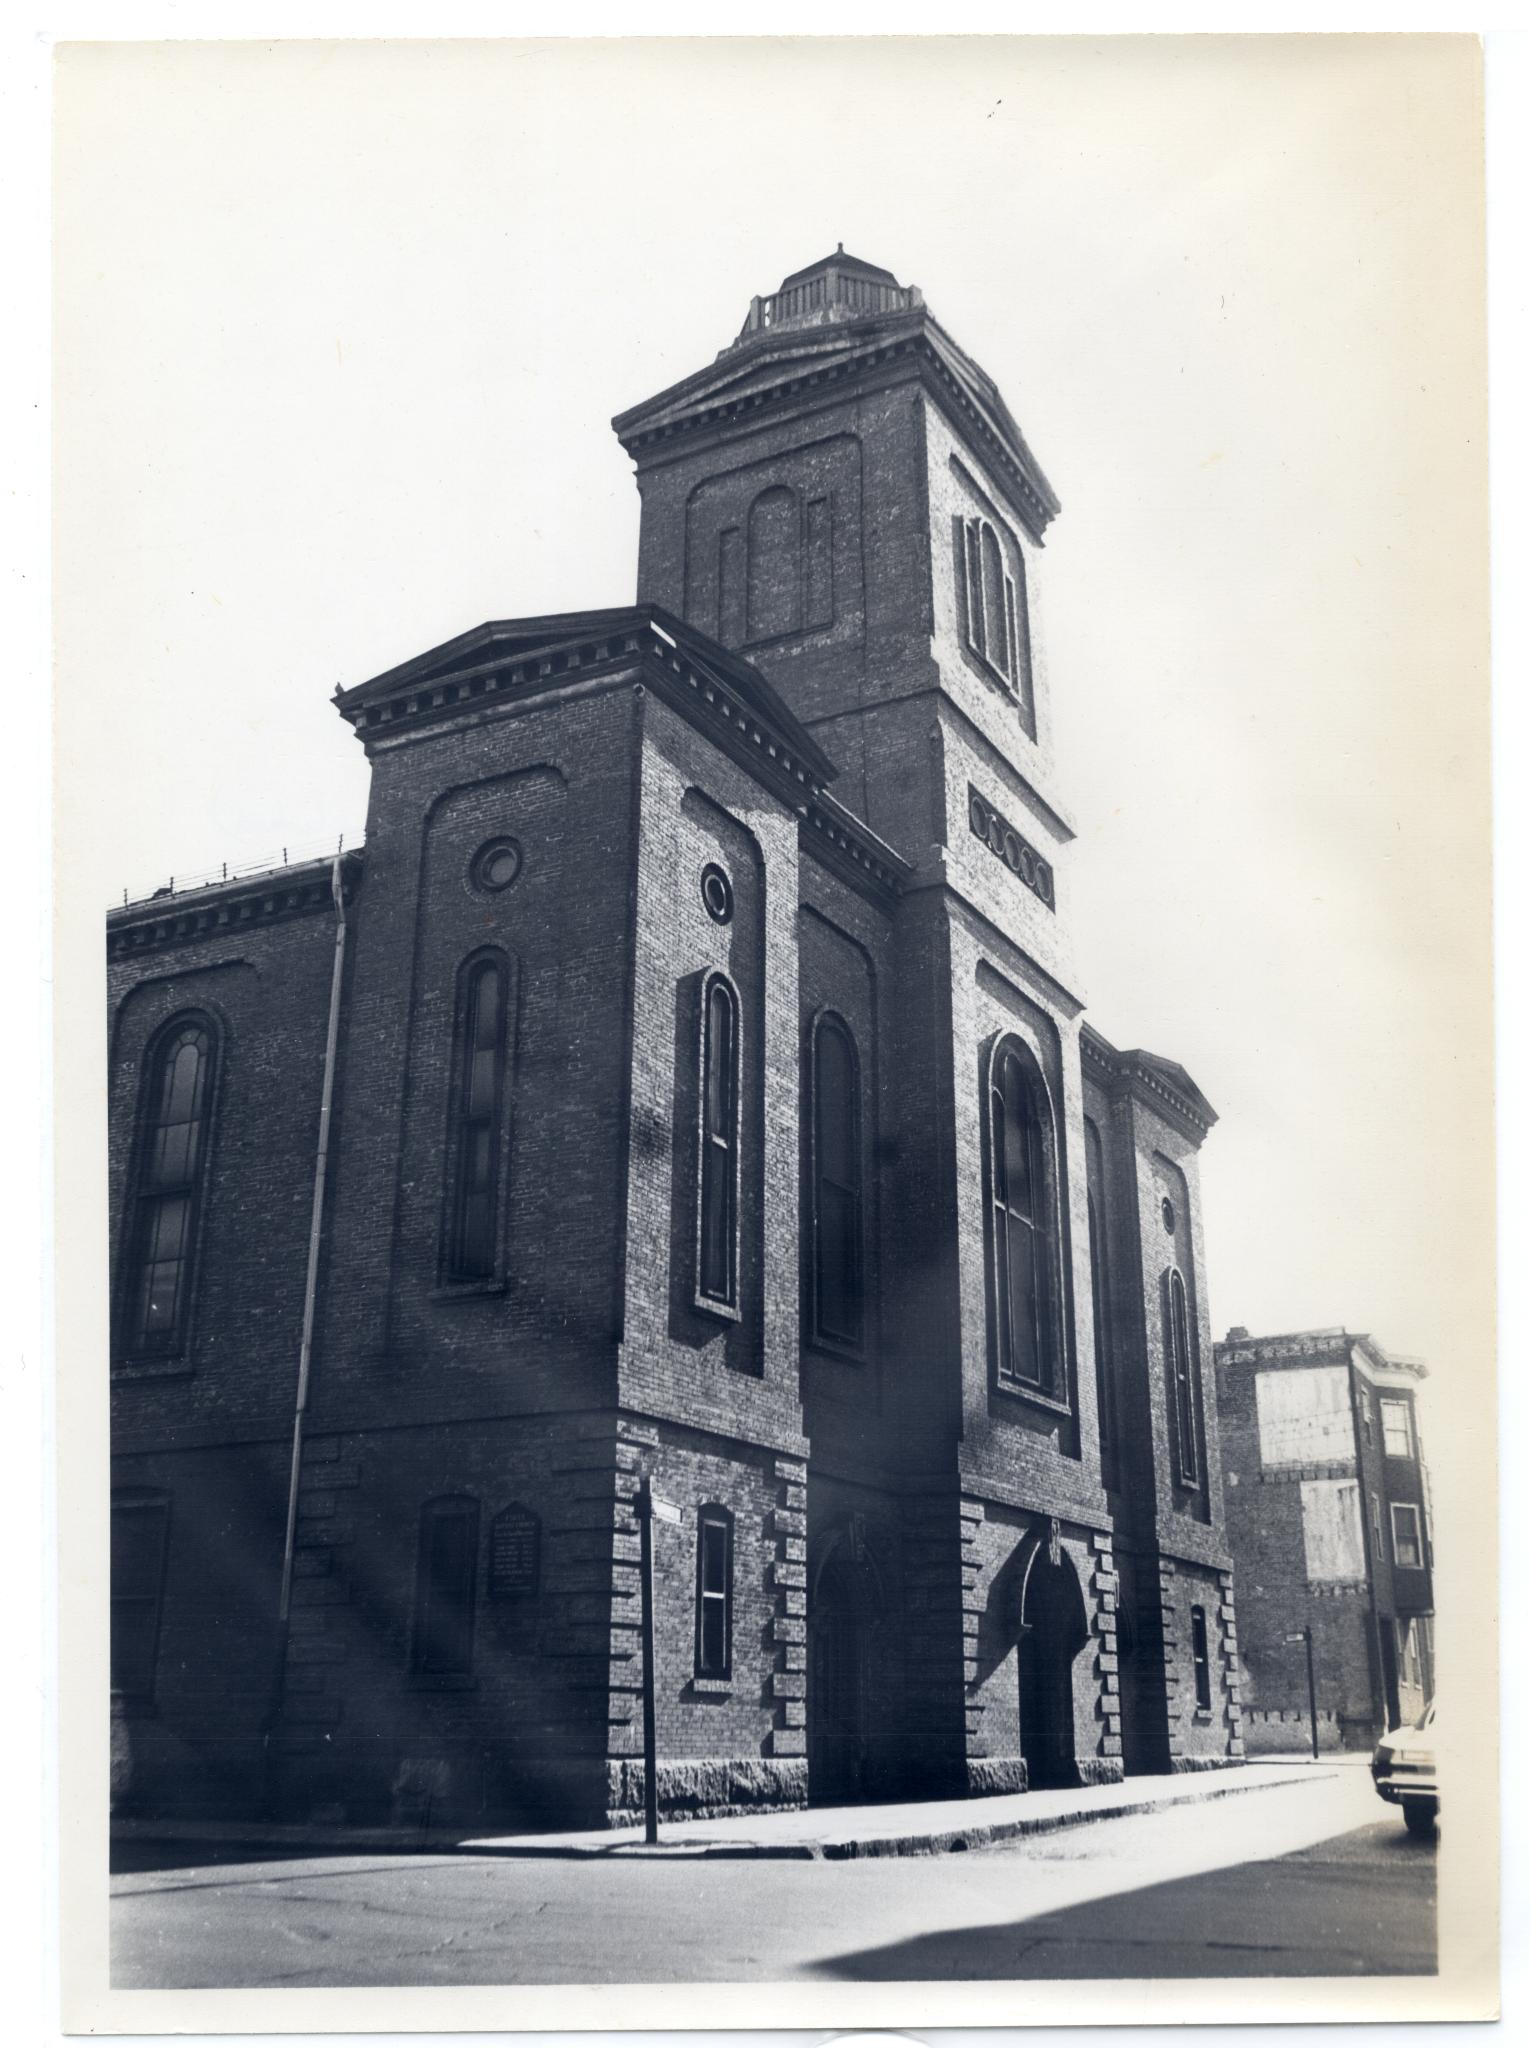 this is a black and white picture of an old church